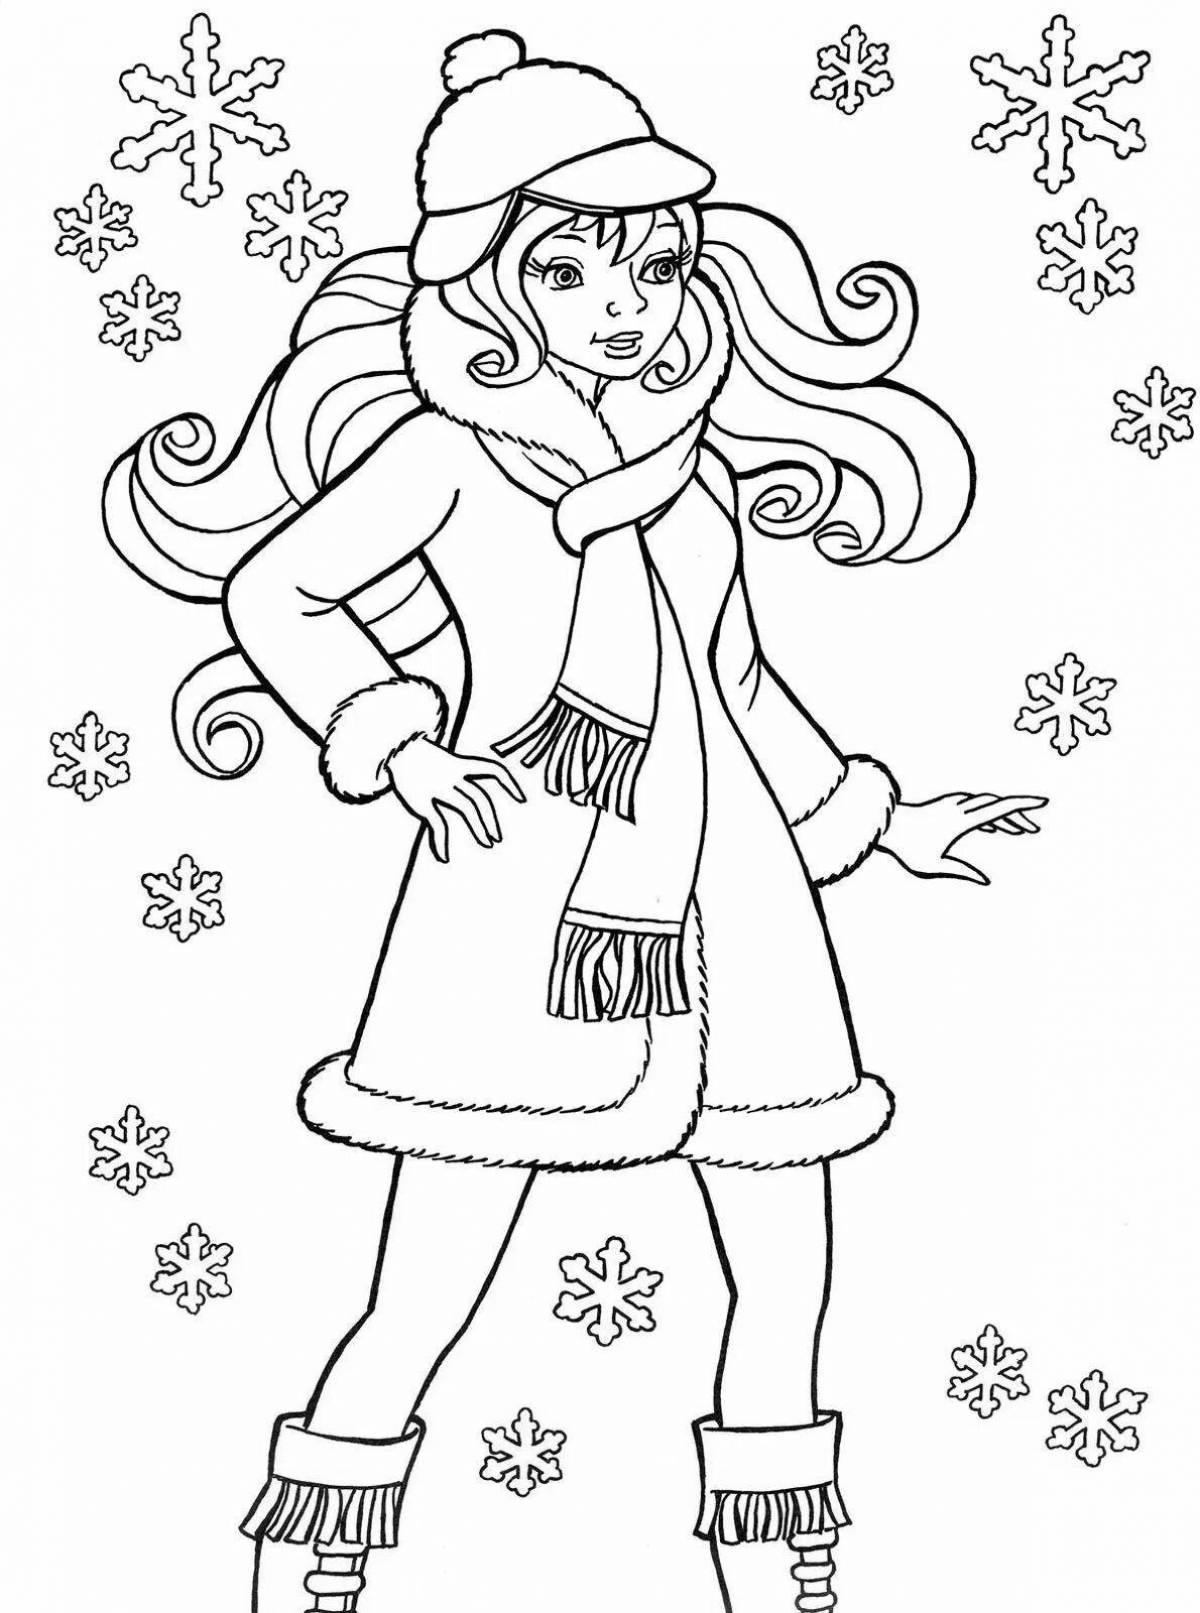 Violent Christmas coloring book for girls 8 years old